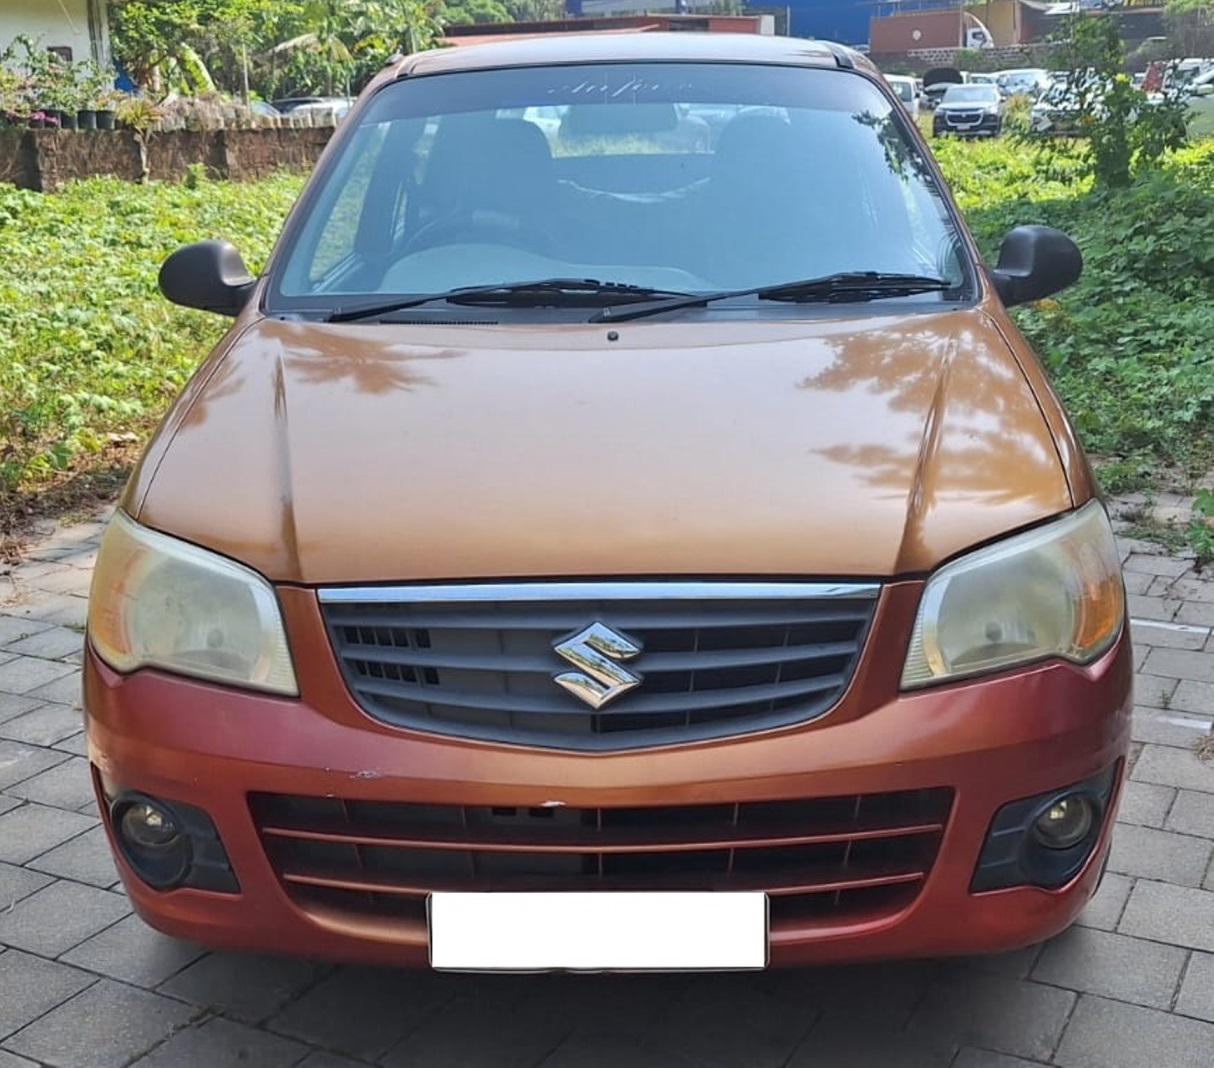 MARUTI K10 2010 Second-hand Car for Sale in Kannur